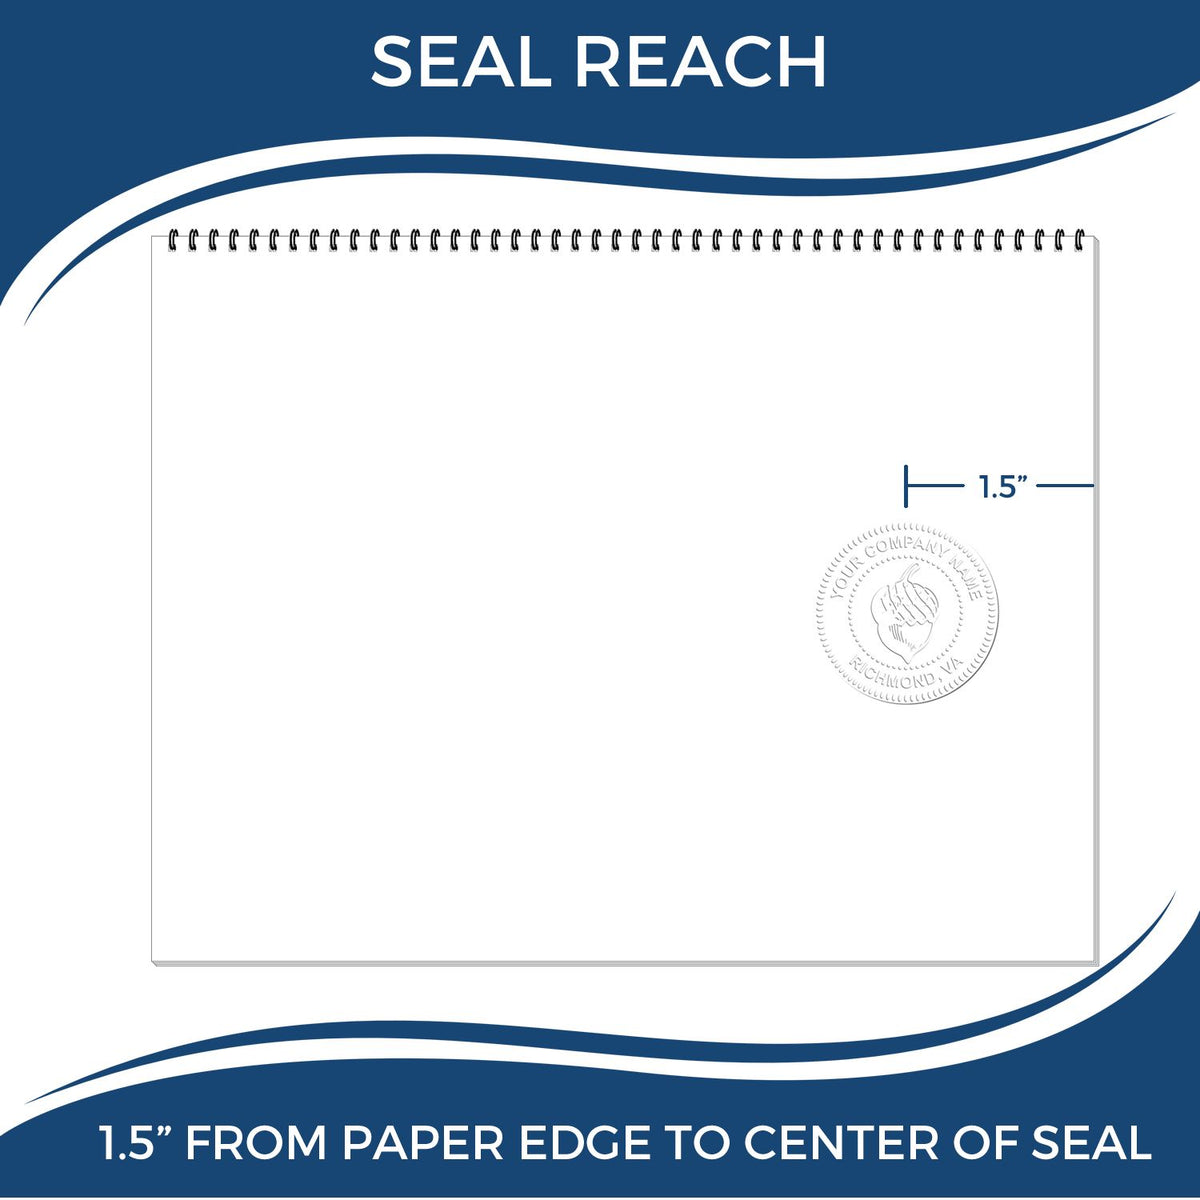 An infographic showing the seal reach which is represented by a ruler and a miniature seal image of the Soft North Carolina Professional Engineer Seal